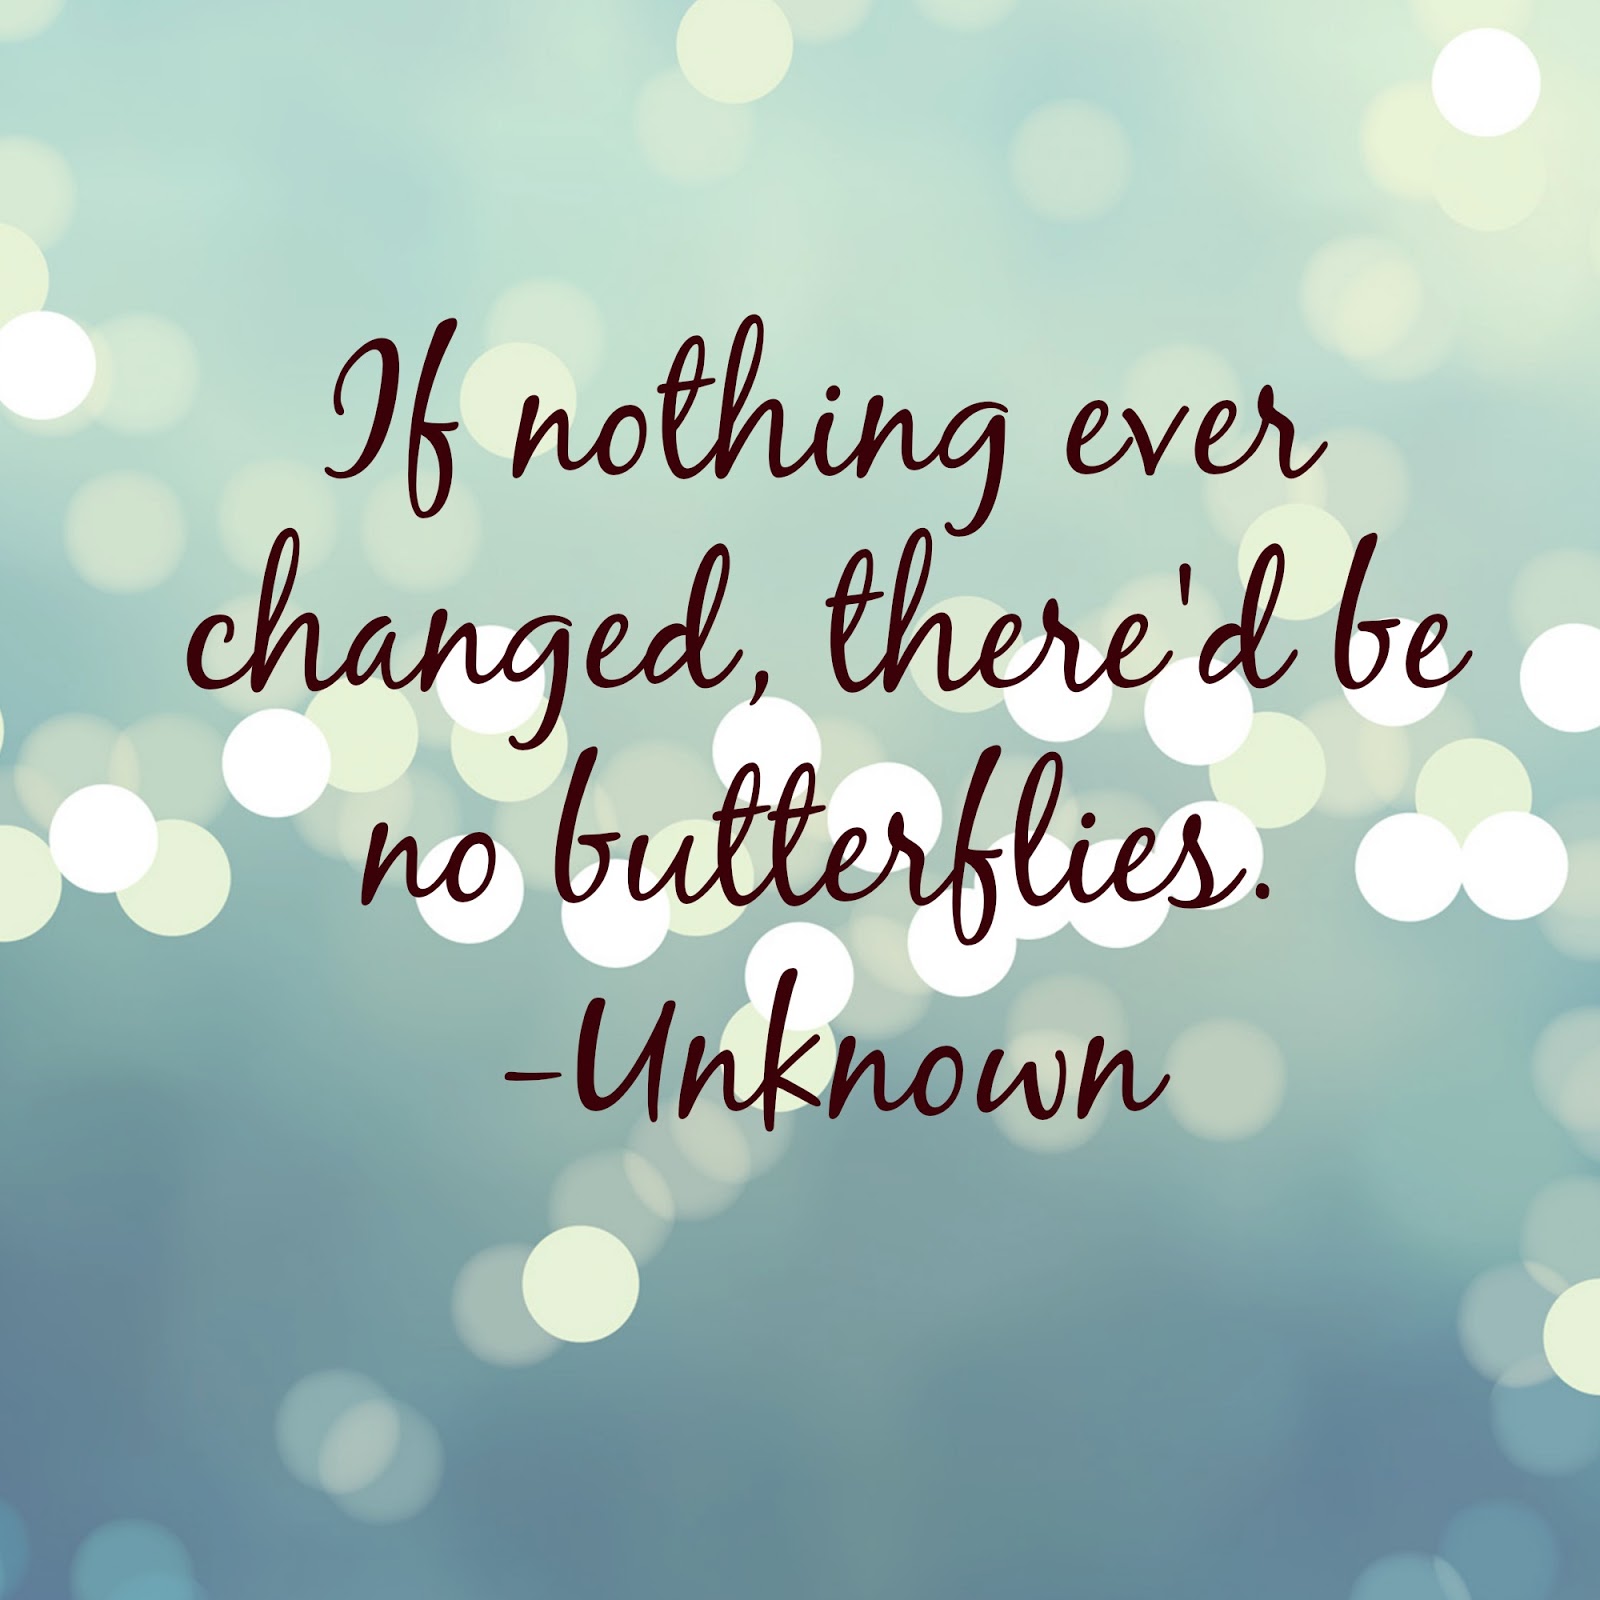 Quote of the Day :: If nothing ever changed, there'd be no butterflies